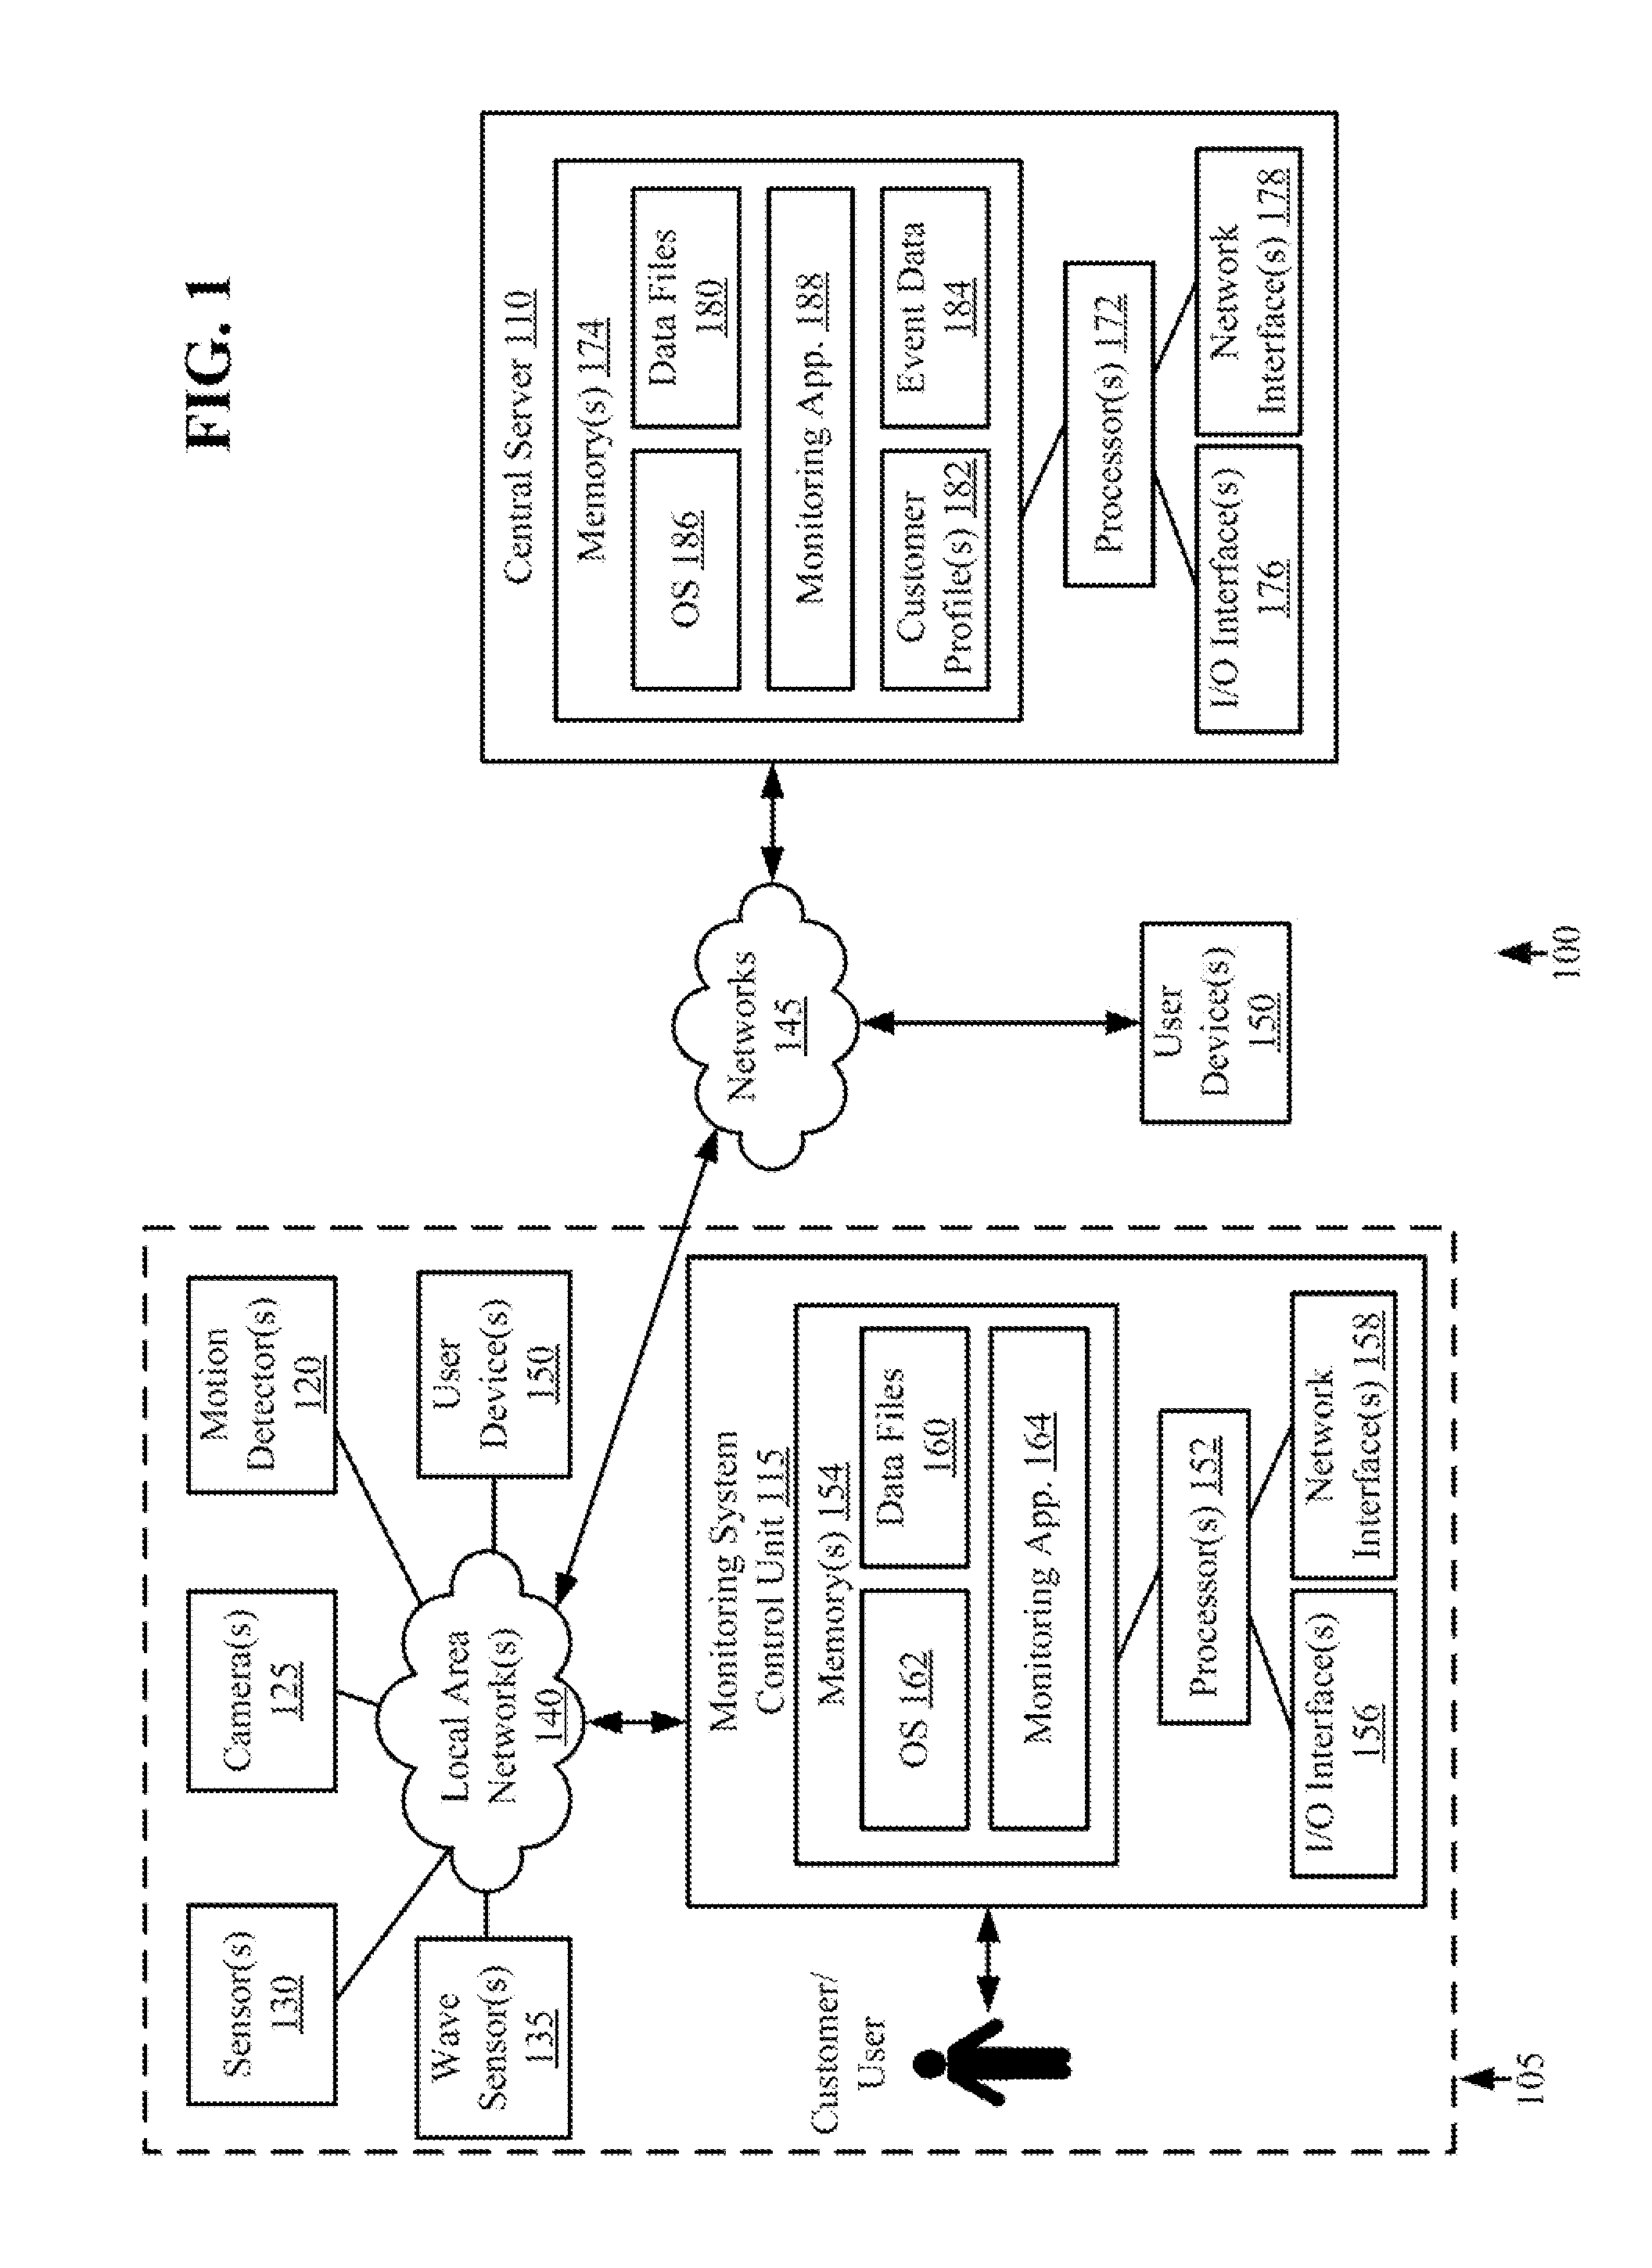 Systems and methods for monitoring presence and movement